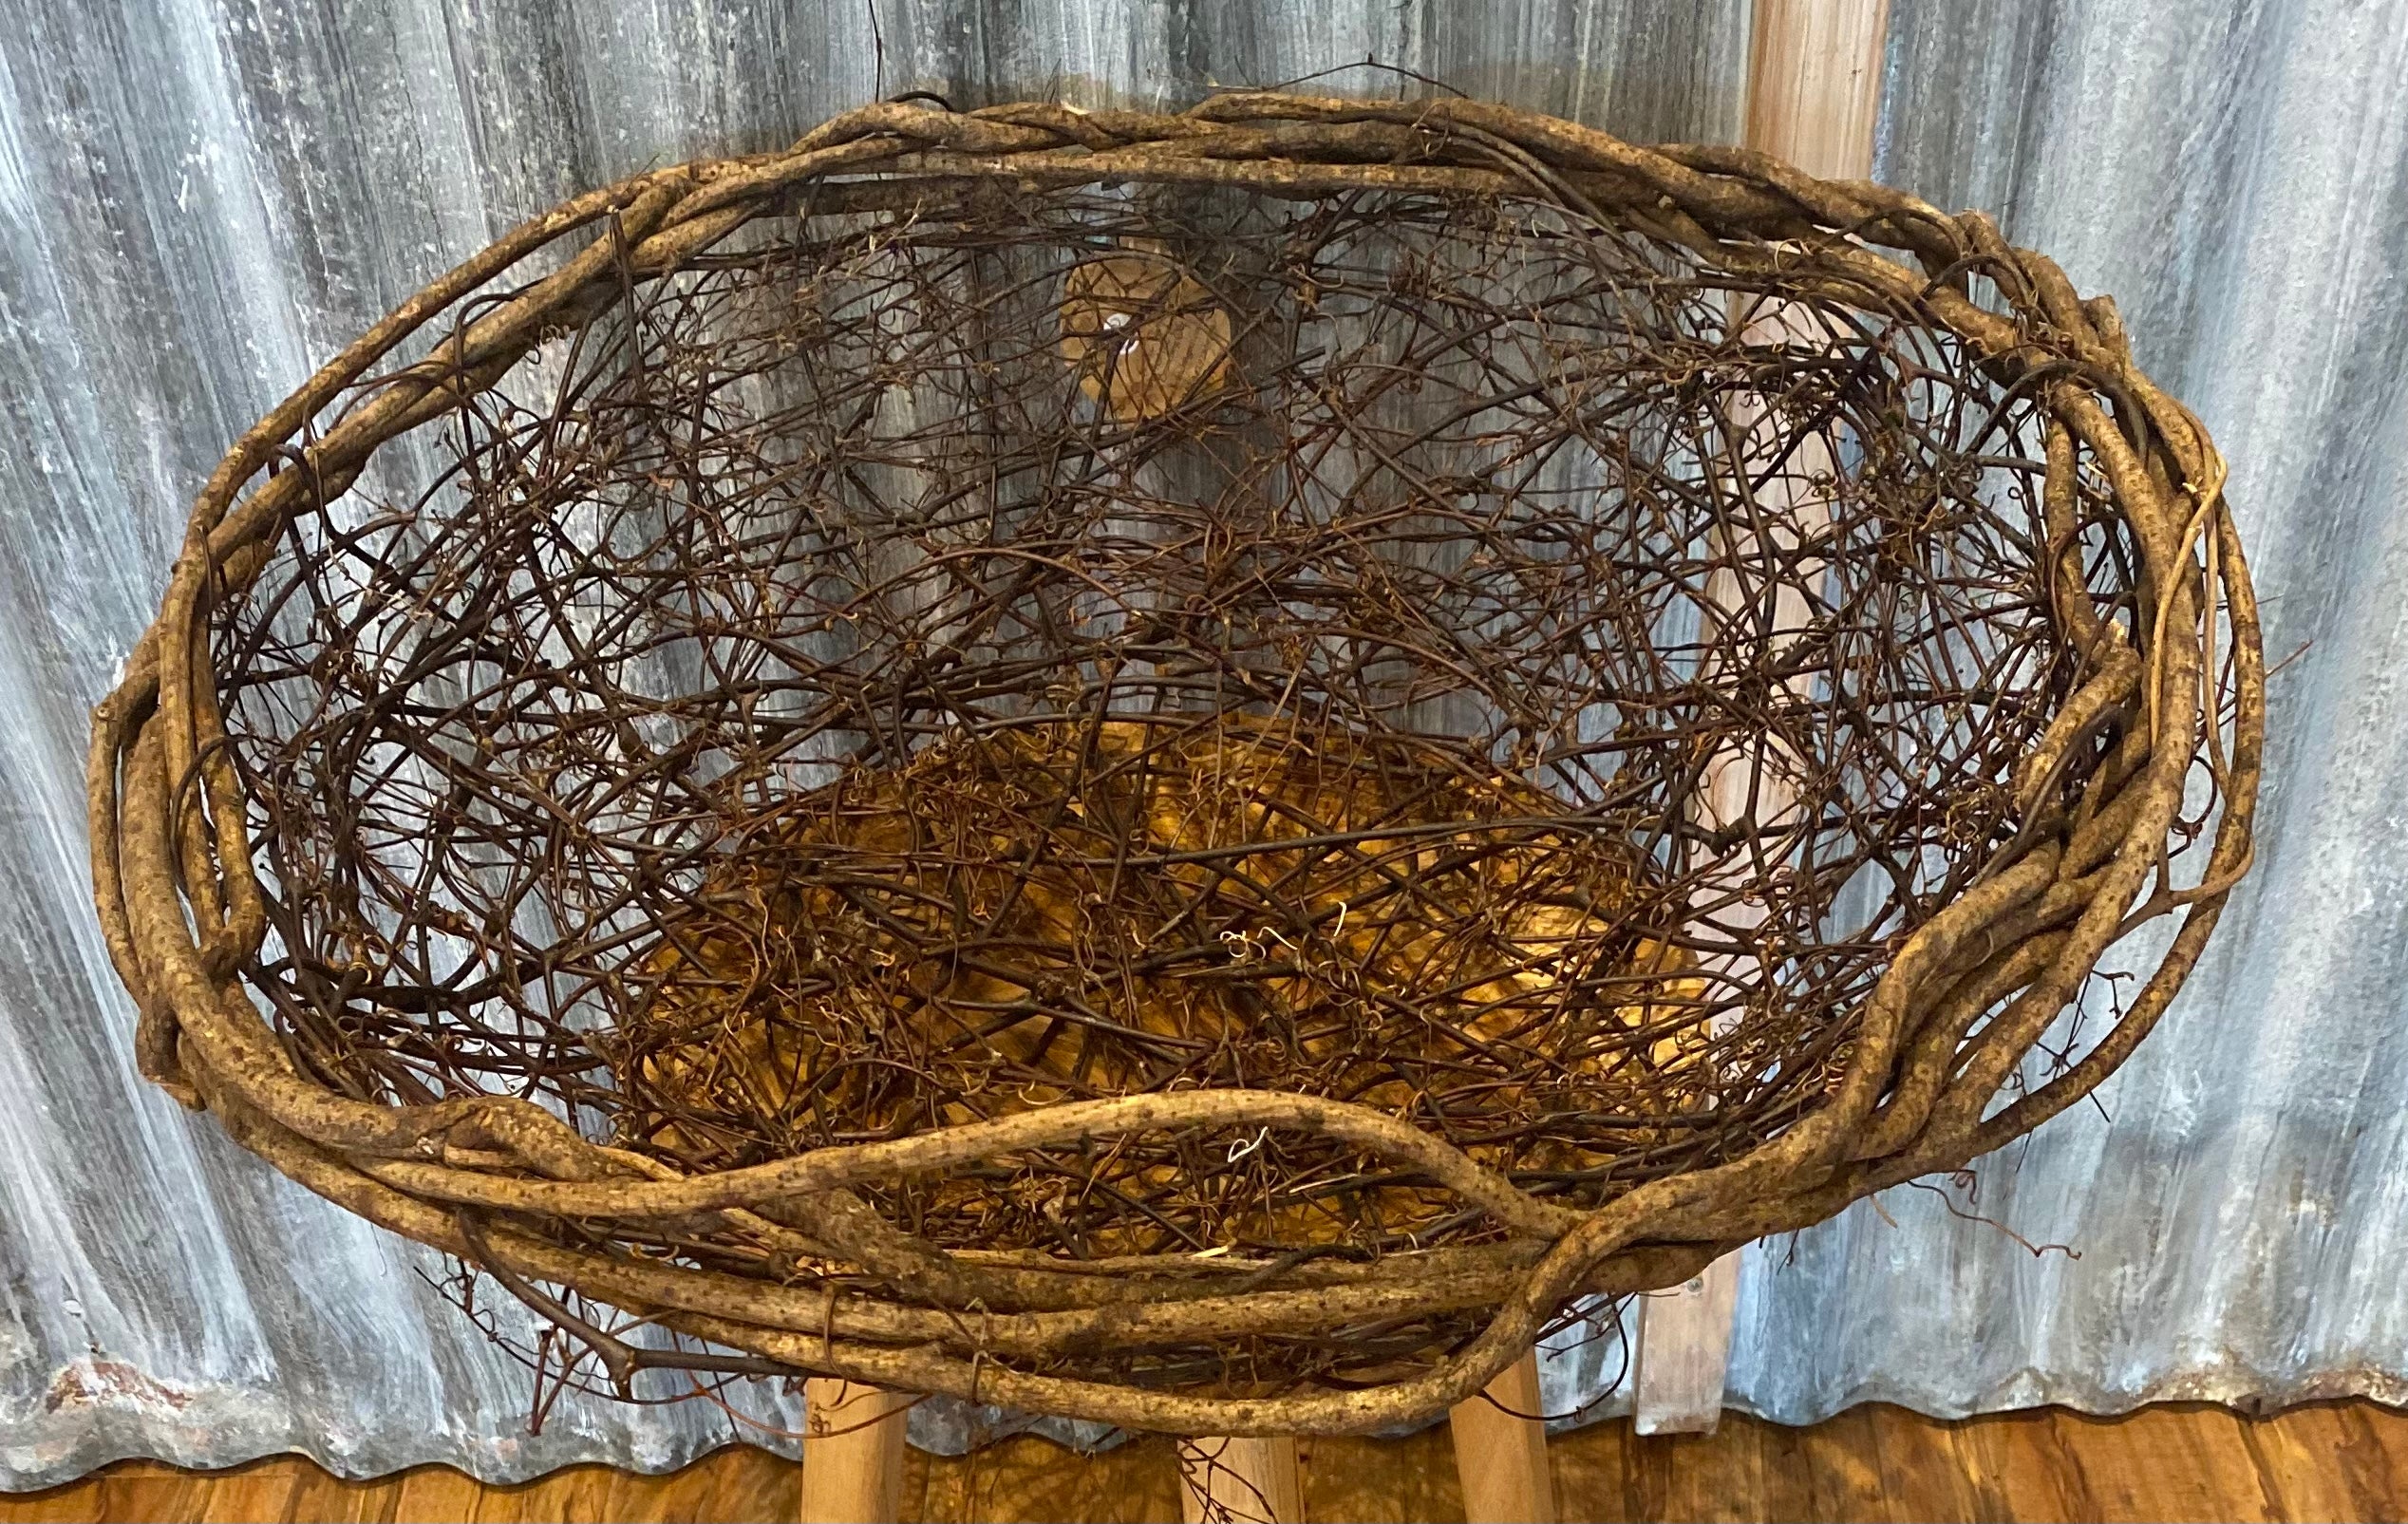 Branching Out Design woven basket